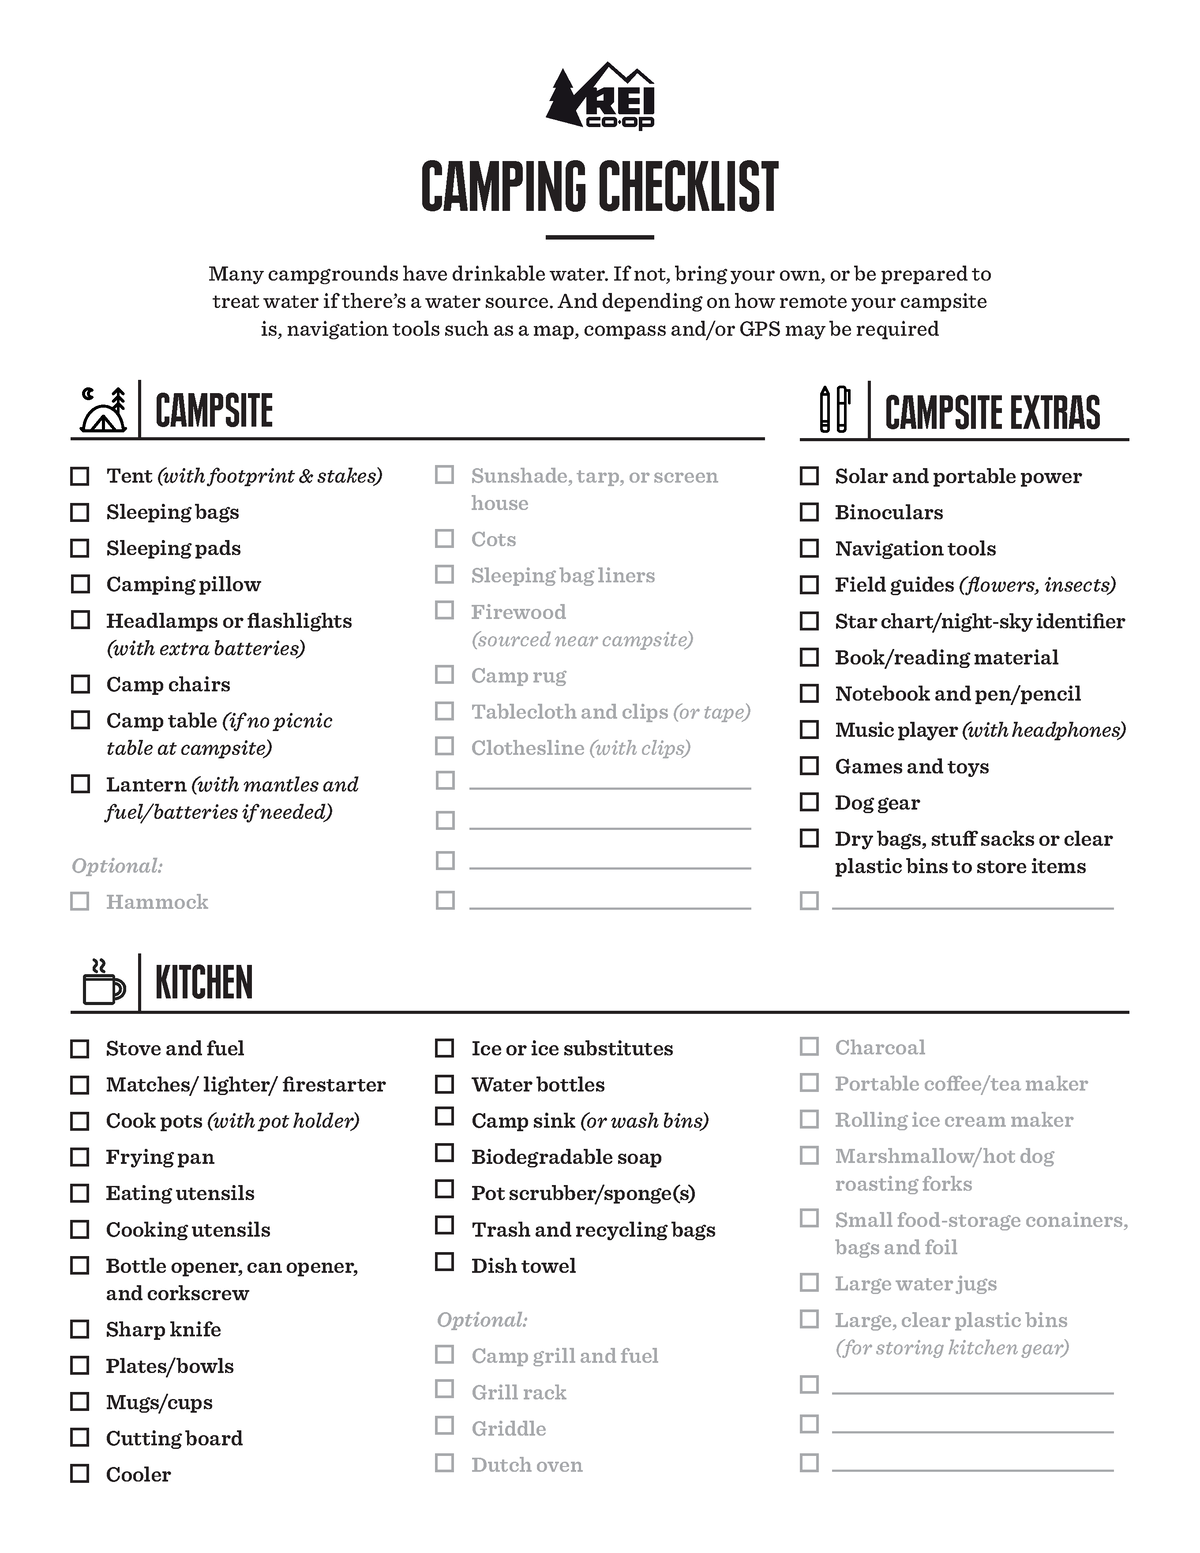 Camping Checklist Final - Charcoal Portable coffee/tea maker Rolling ...